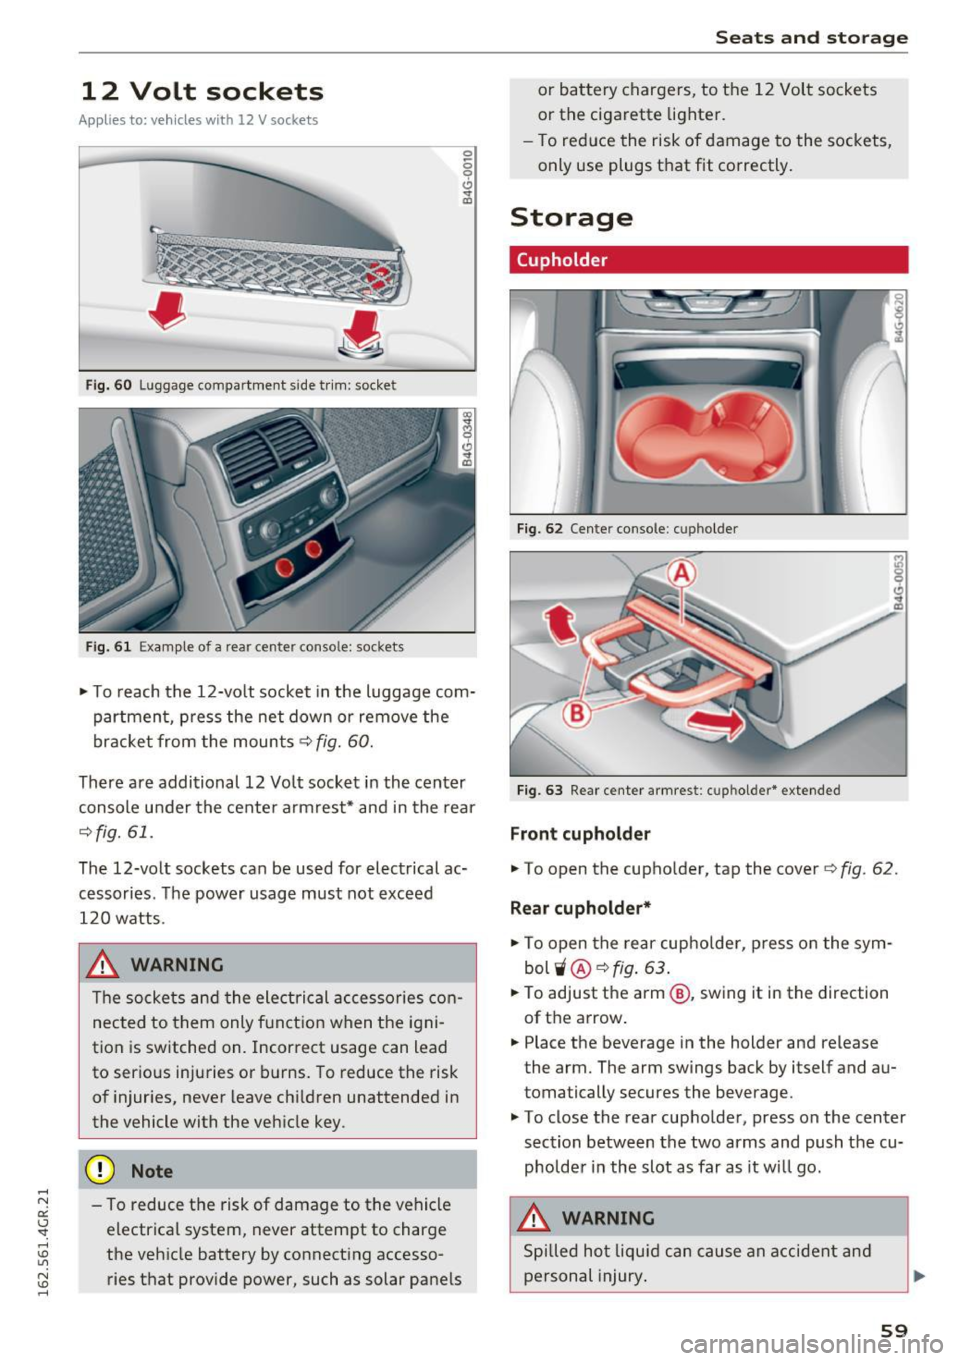 AUDI RS7 SPORTBACK 2016  Owners Manual 12  Volt  sockets 
Applies  to:  veh icles wit h 12 V sockets 
Fi g.  60  Luggage  compartment side tr im: socket 
Fi g. 61 Exa mple  of a rear  center  console:  sockets 
0 0 9 (!) ., ID 
~ To  reach